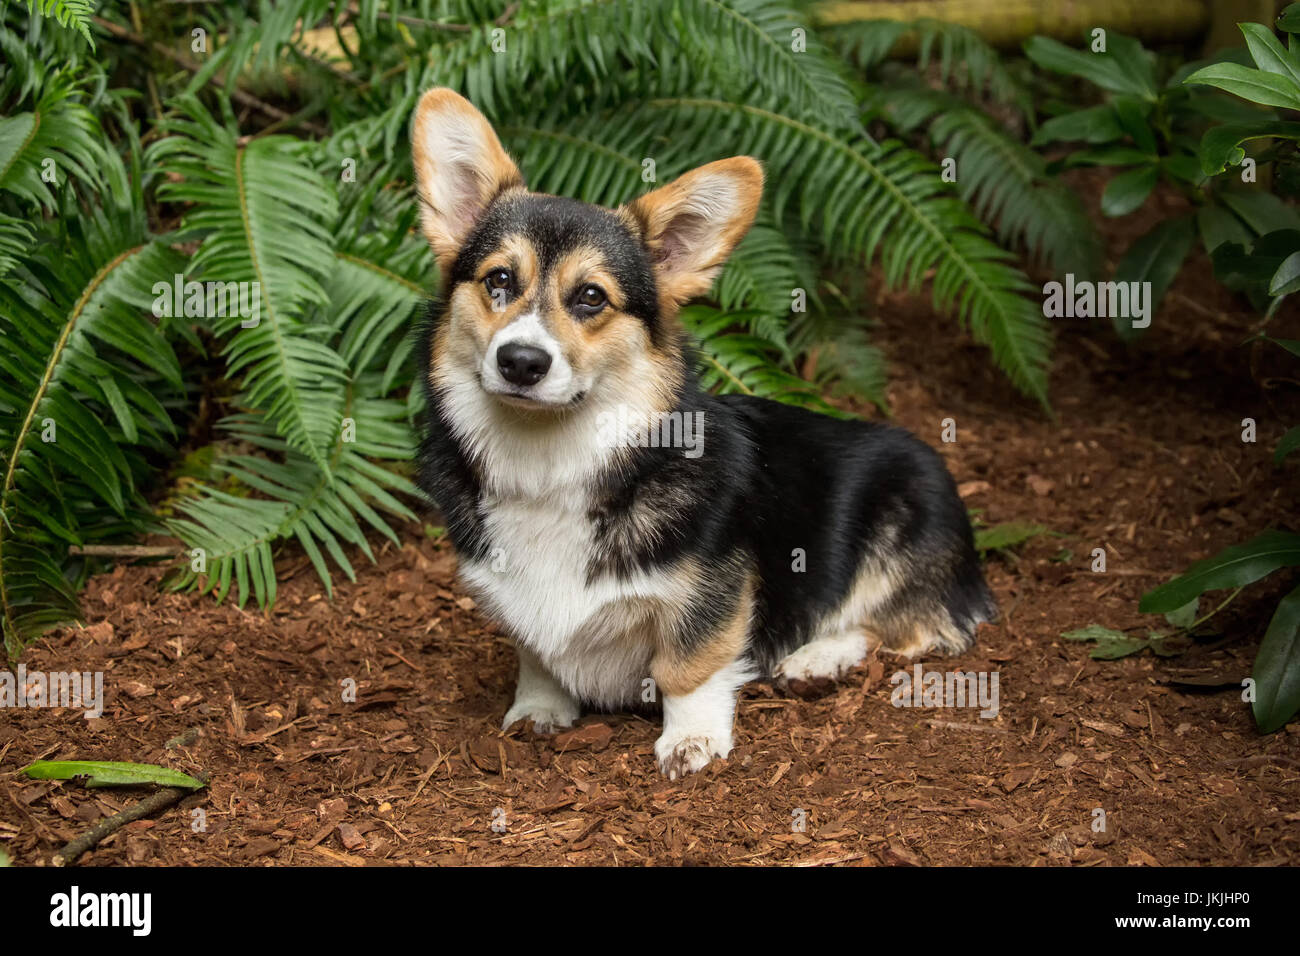 Tucker, a six month old Corgi puppy, posing in front of Western Sword Fern in Issaquah, Washington, USA Stock Photo